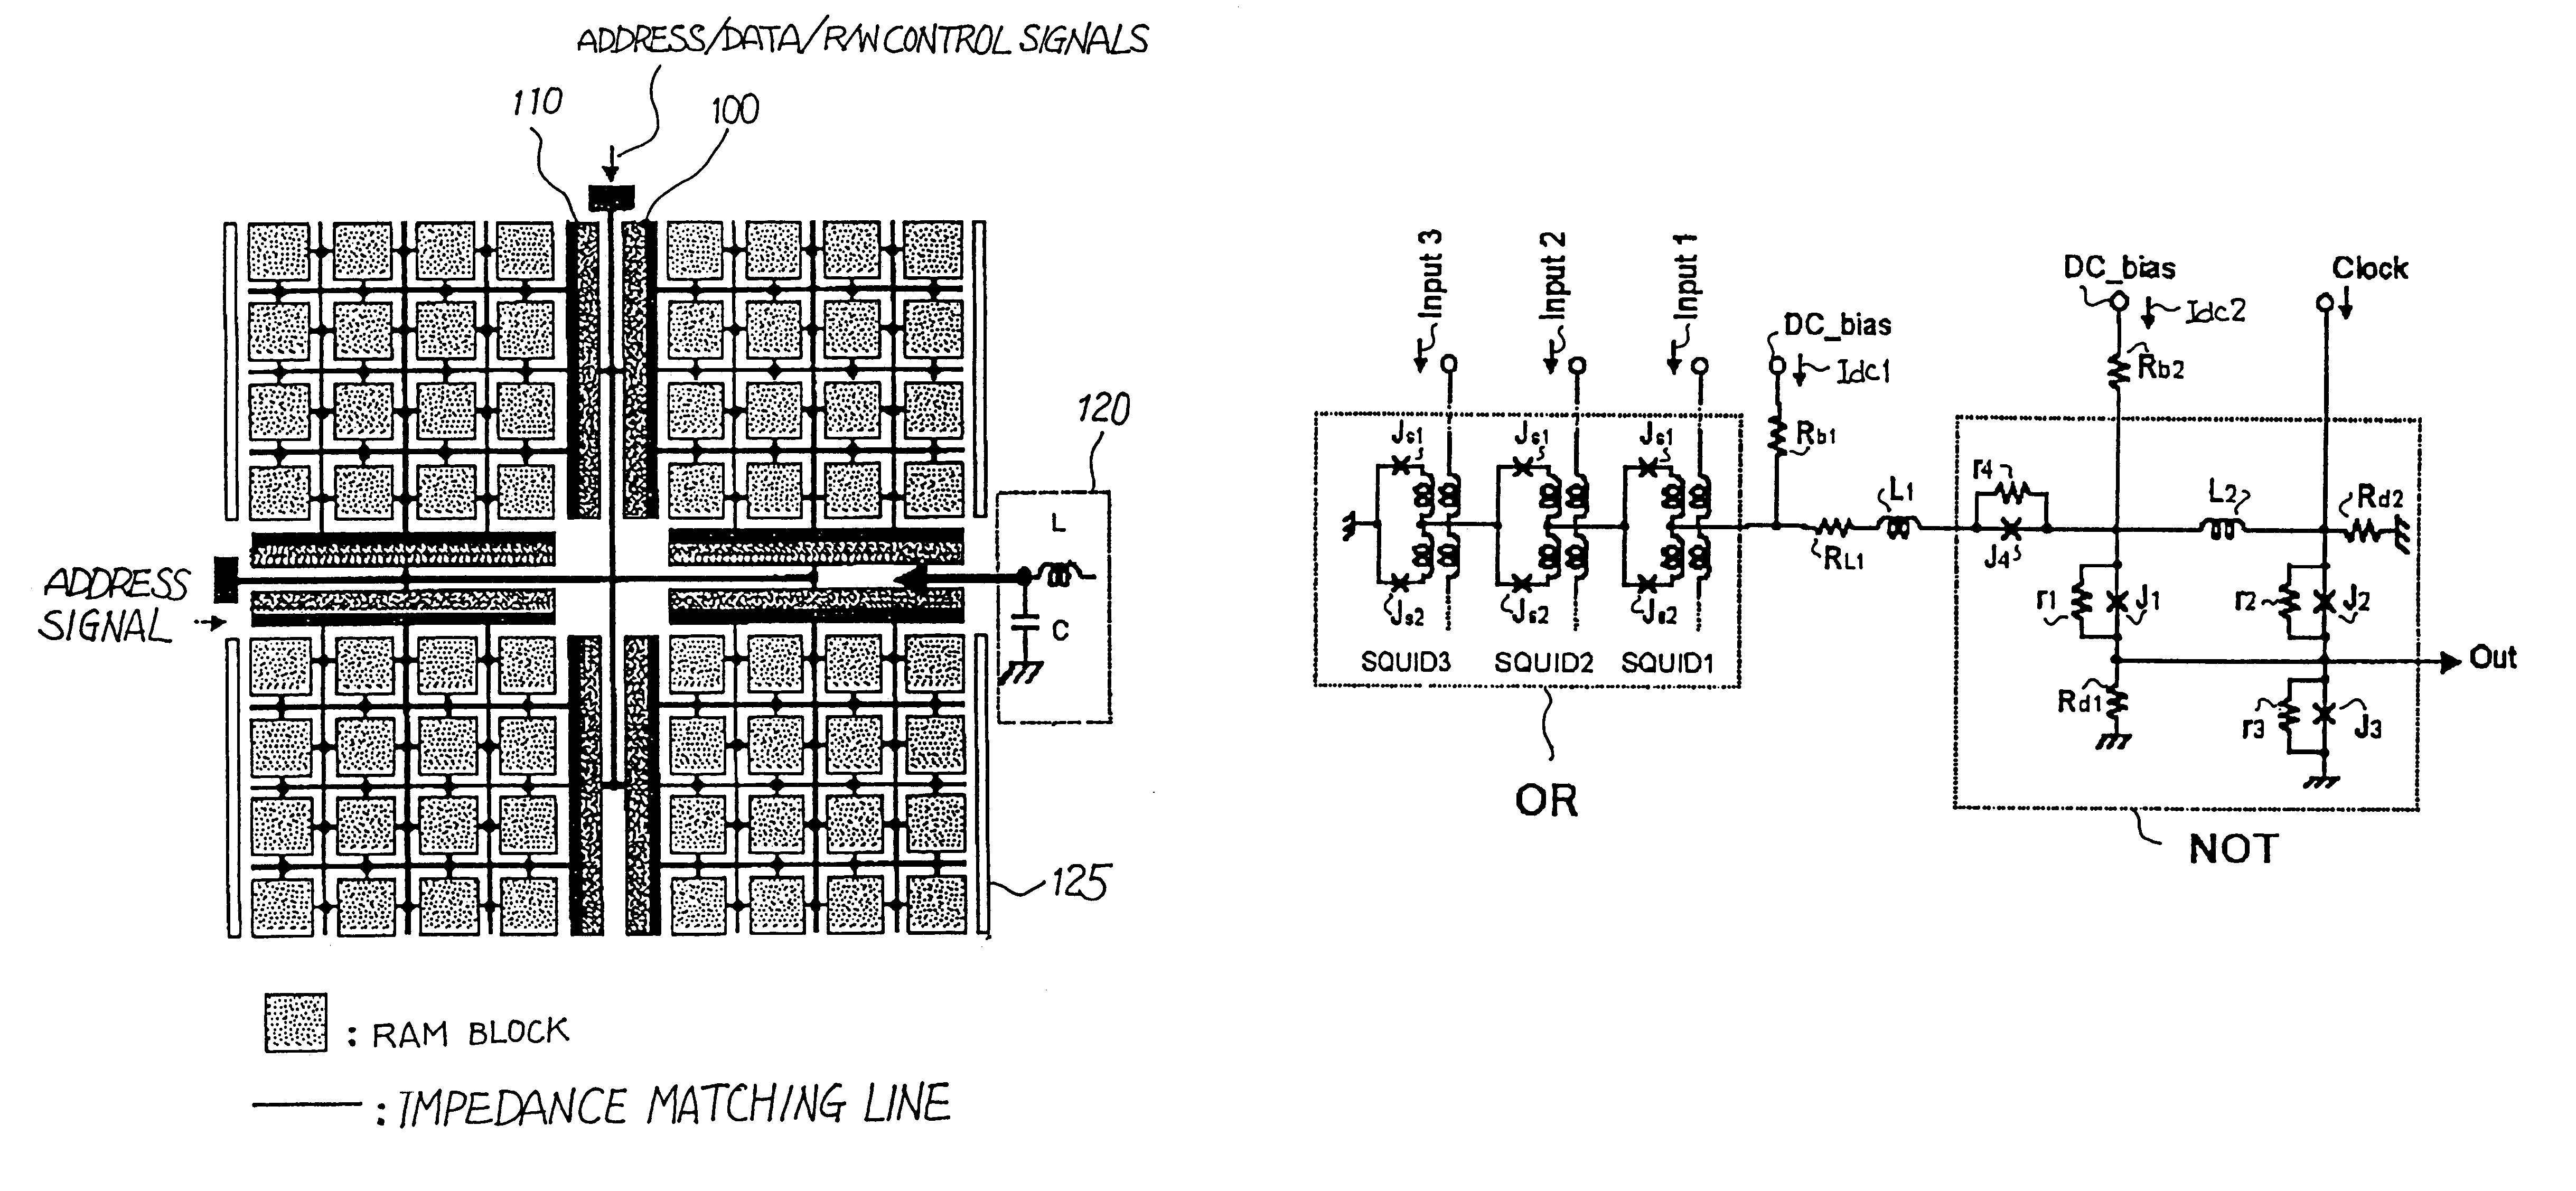 Superconducting circuit having superconductive circuit device of voltage-type logic and superconductive circuit device of fluxoid-type logic device selectively used therein